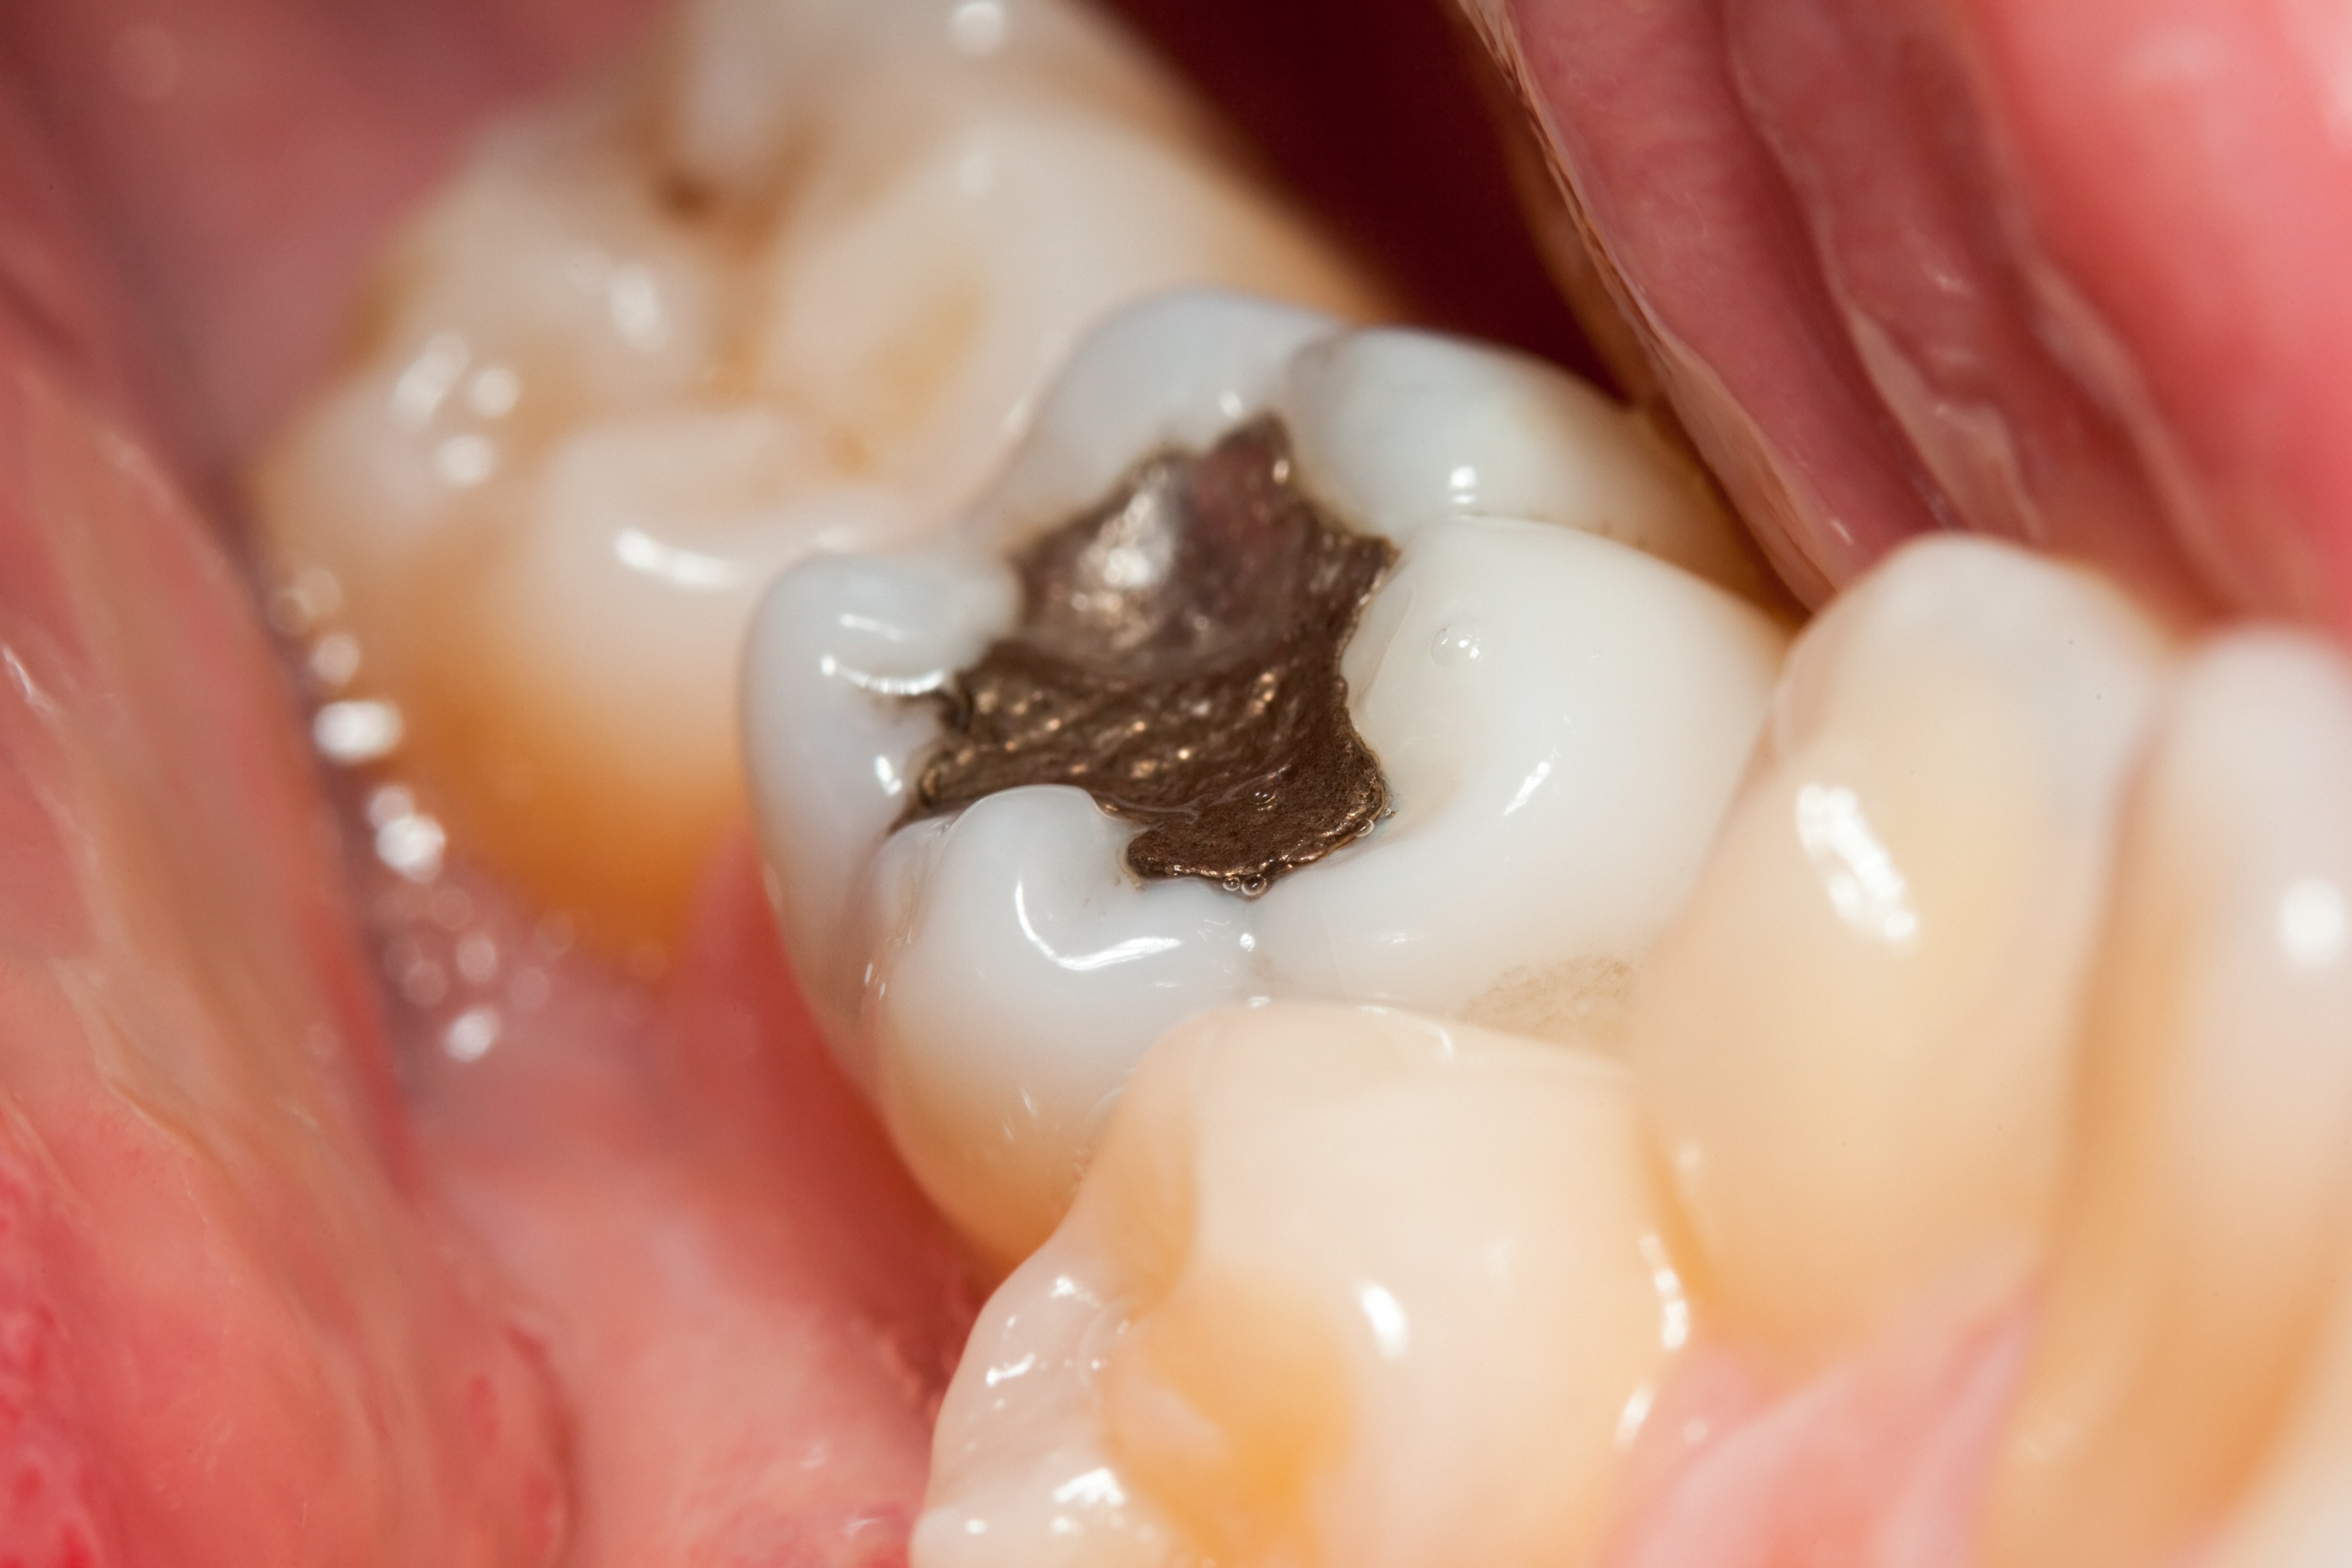 What is the difference between an amalgam filling and a composite filling? Learn more now